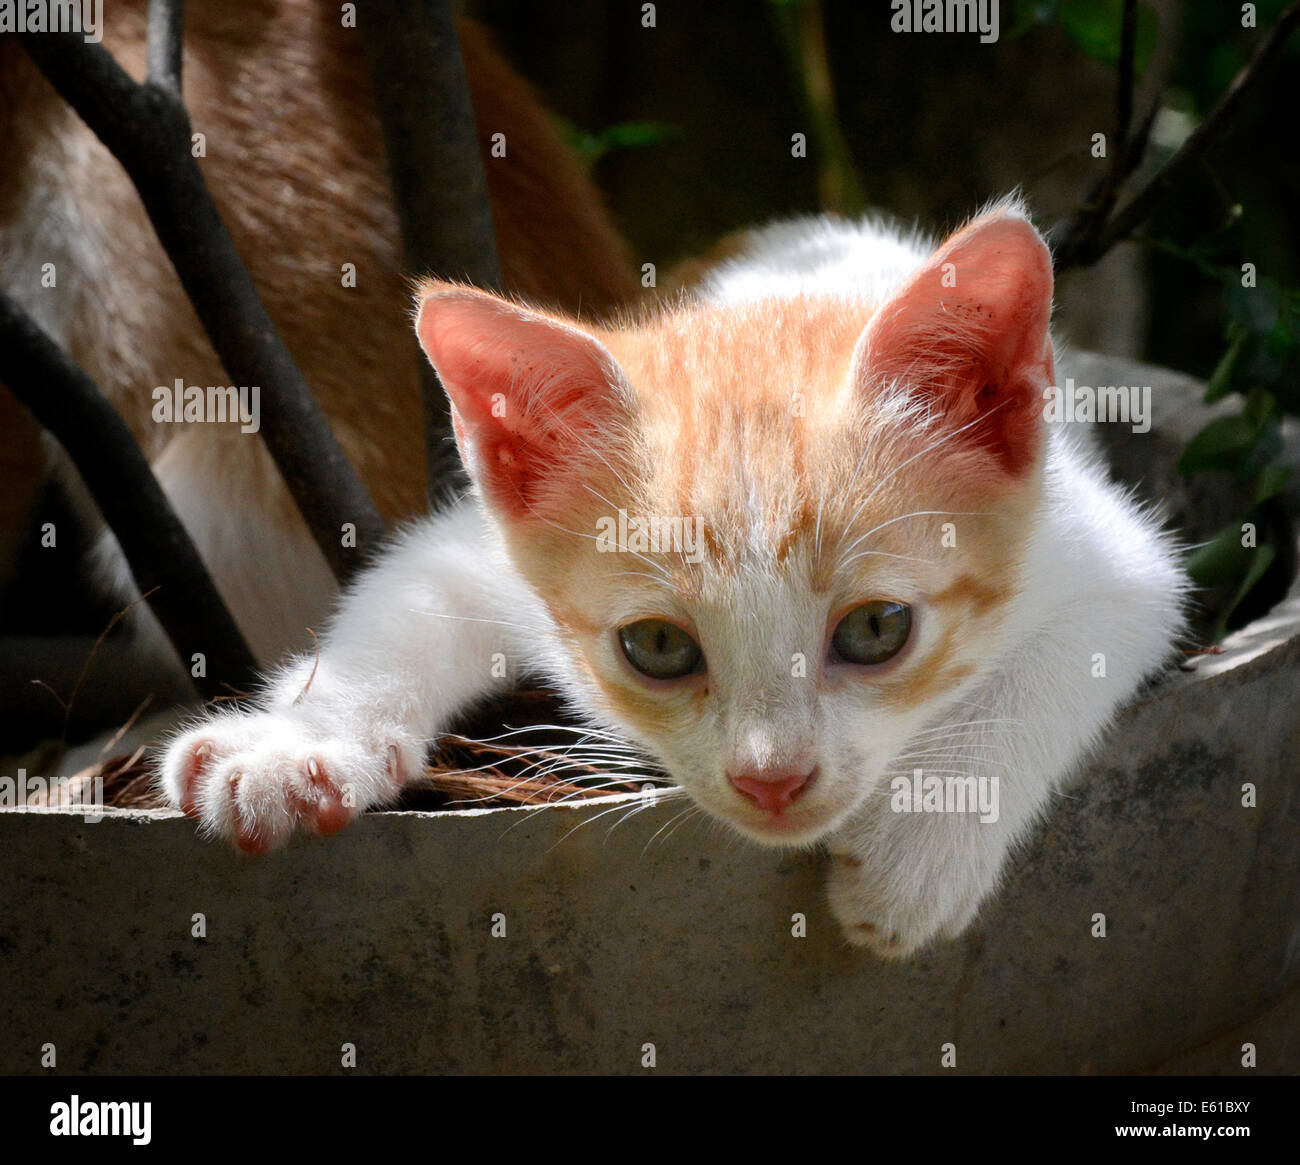 Funny kitten. Curious cat. Funny animals Stock Photo